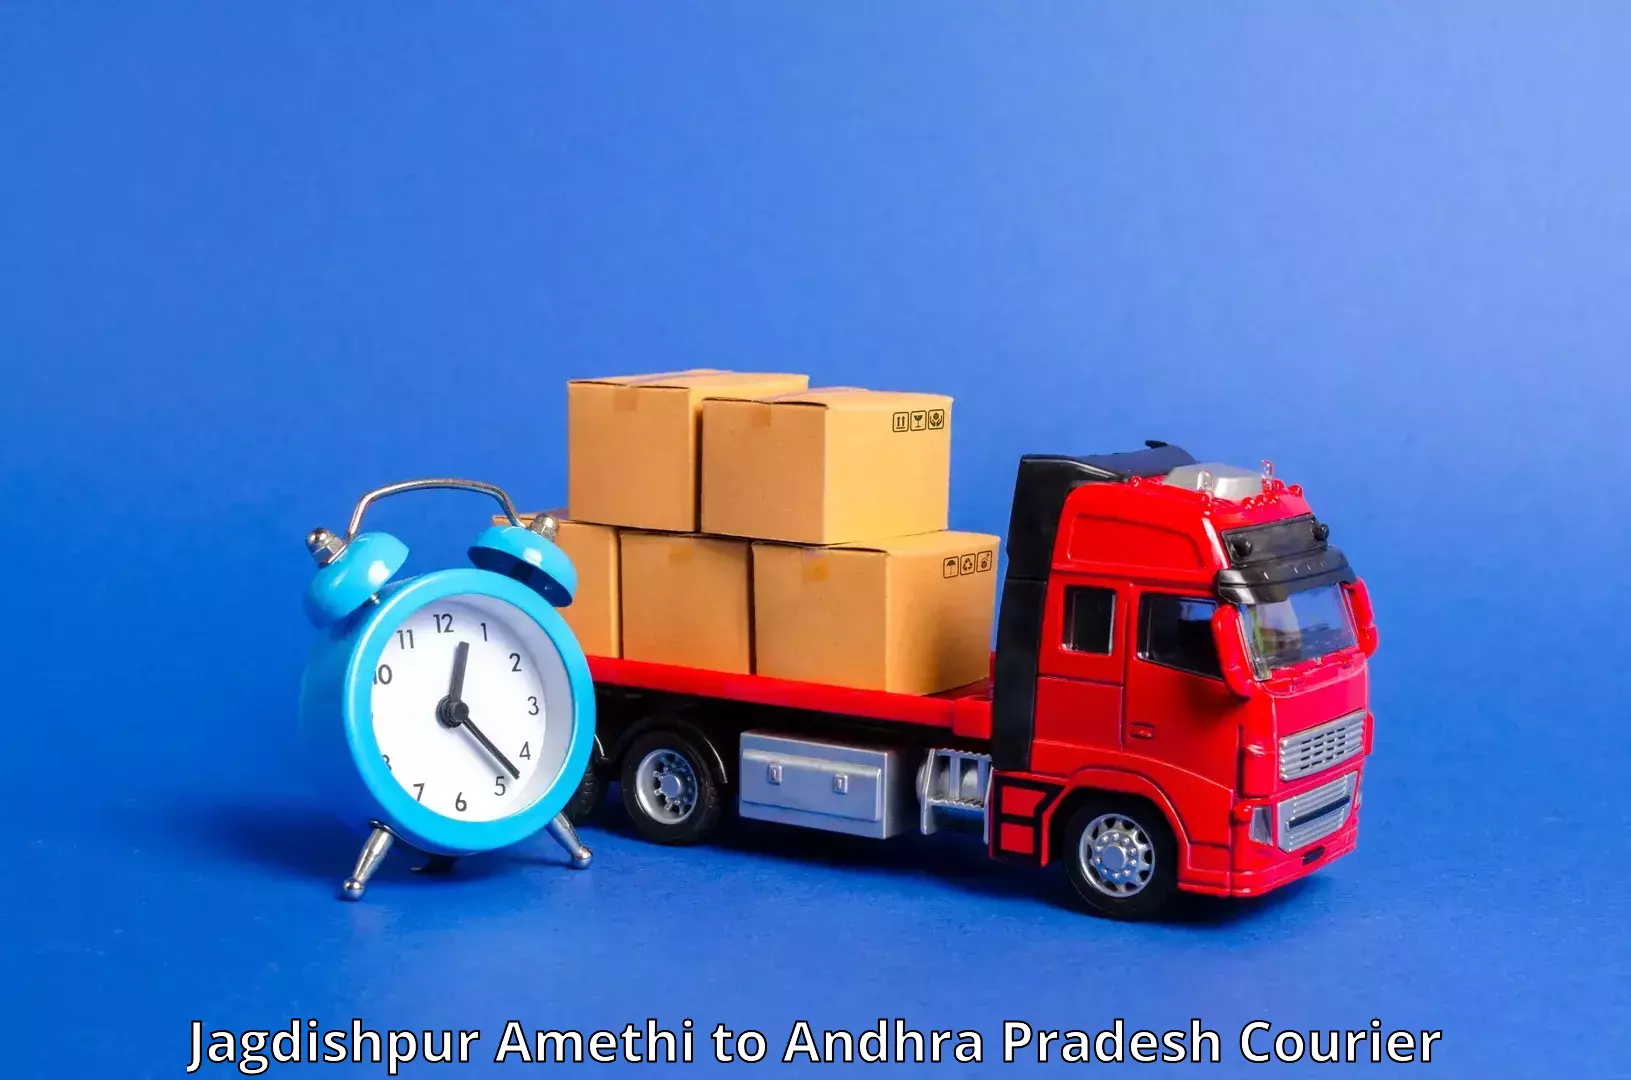 Reliable delivery network Jagdishpur Amethi to Nuzvid